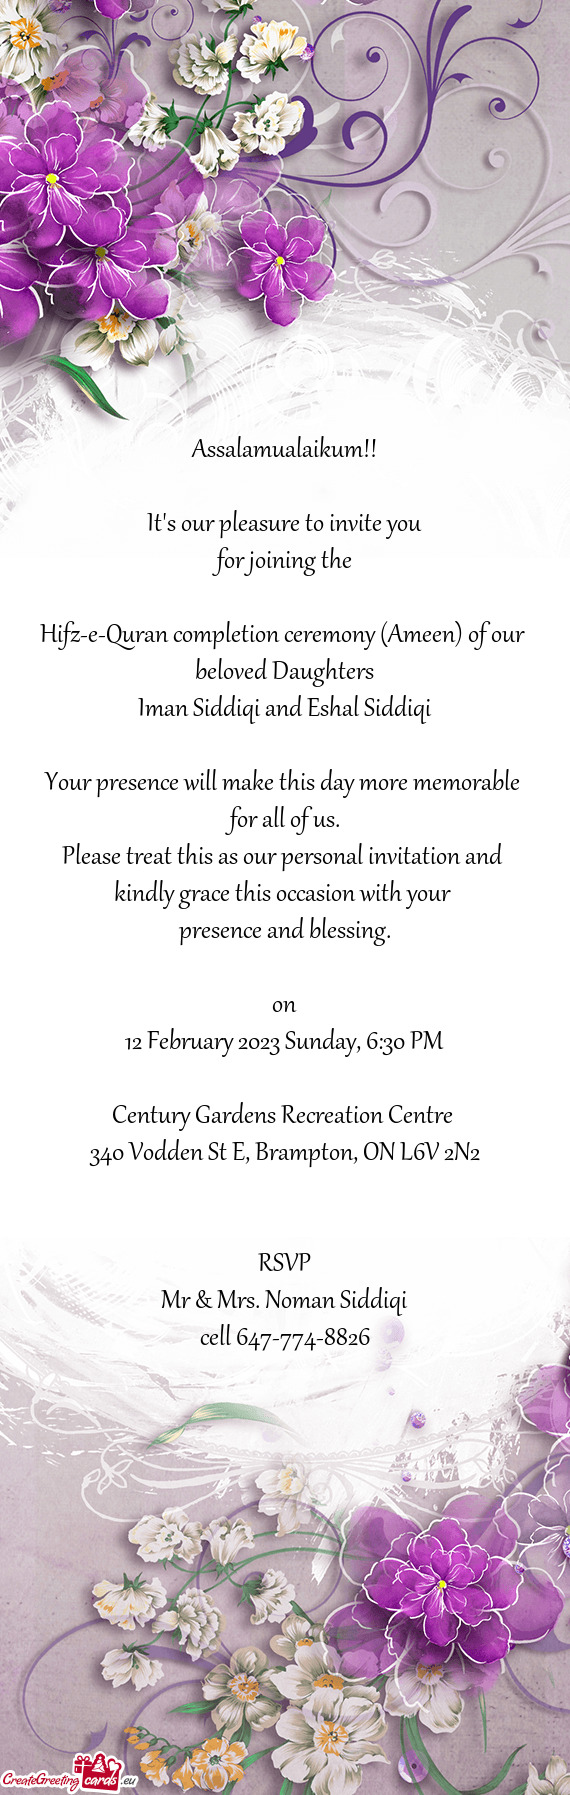 Hifz-e-Quran completion ceremony (Ameen) of our